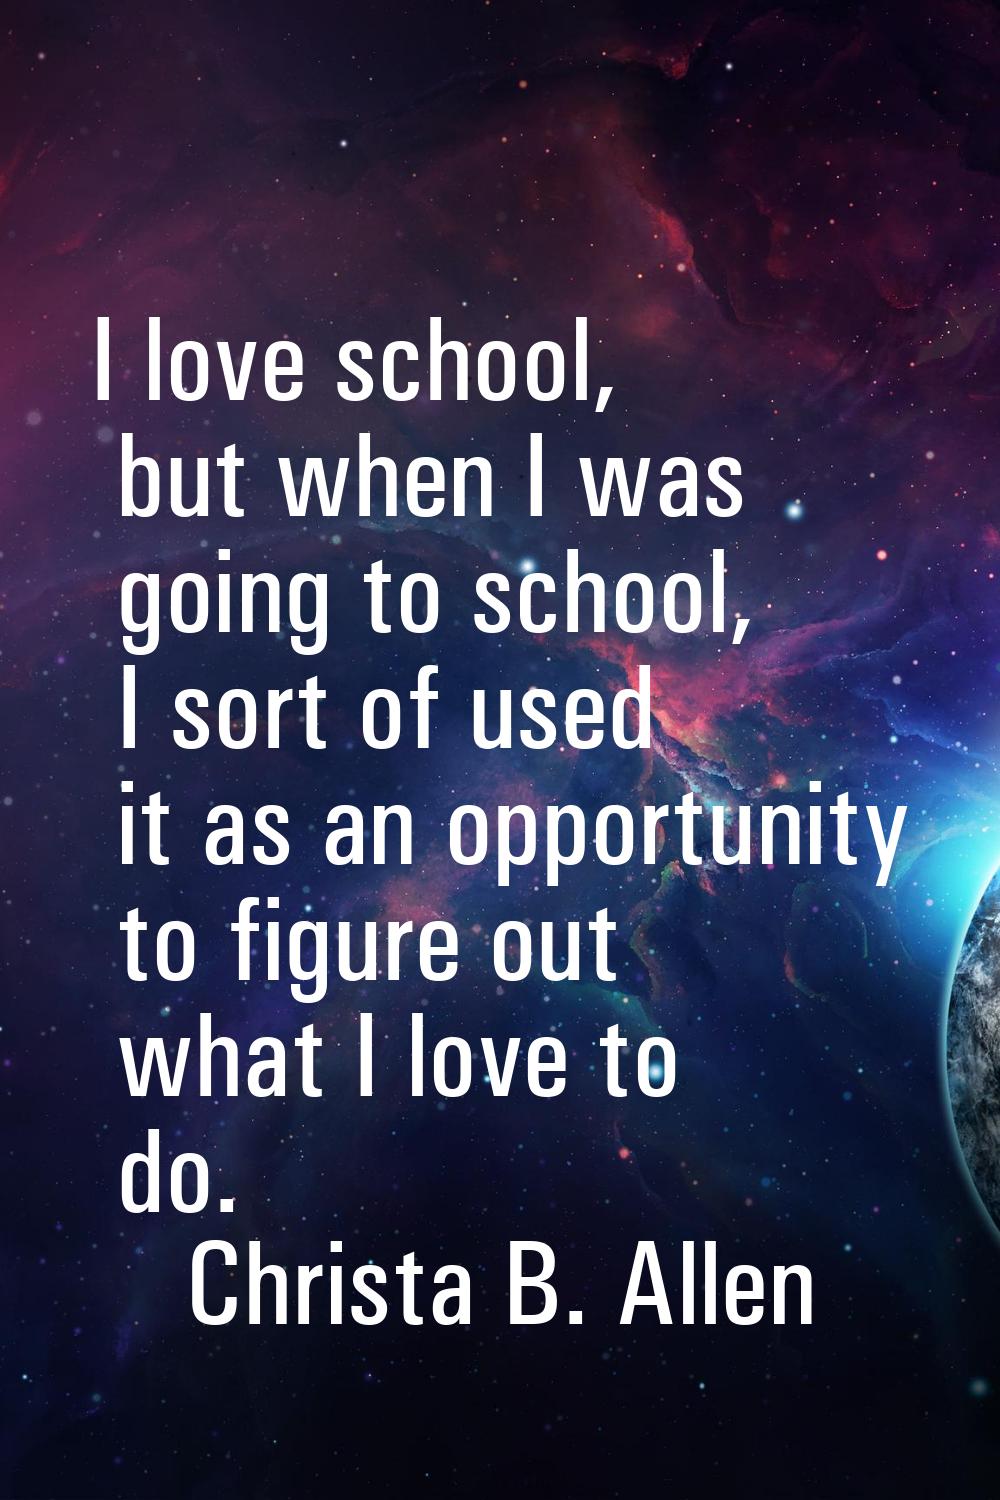 I love school, but when I was going to school, I sort of used it as an opportunity to figure out wh